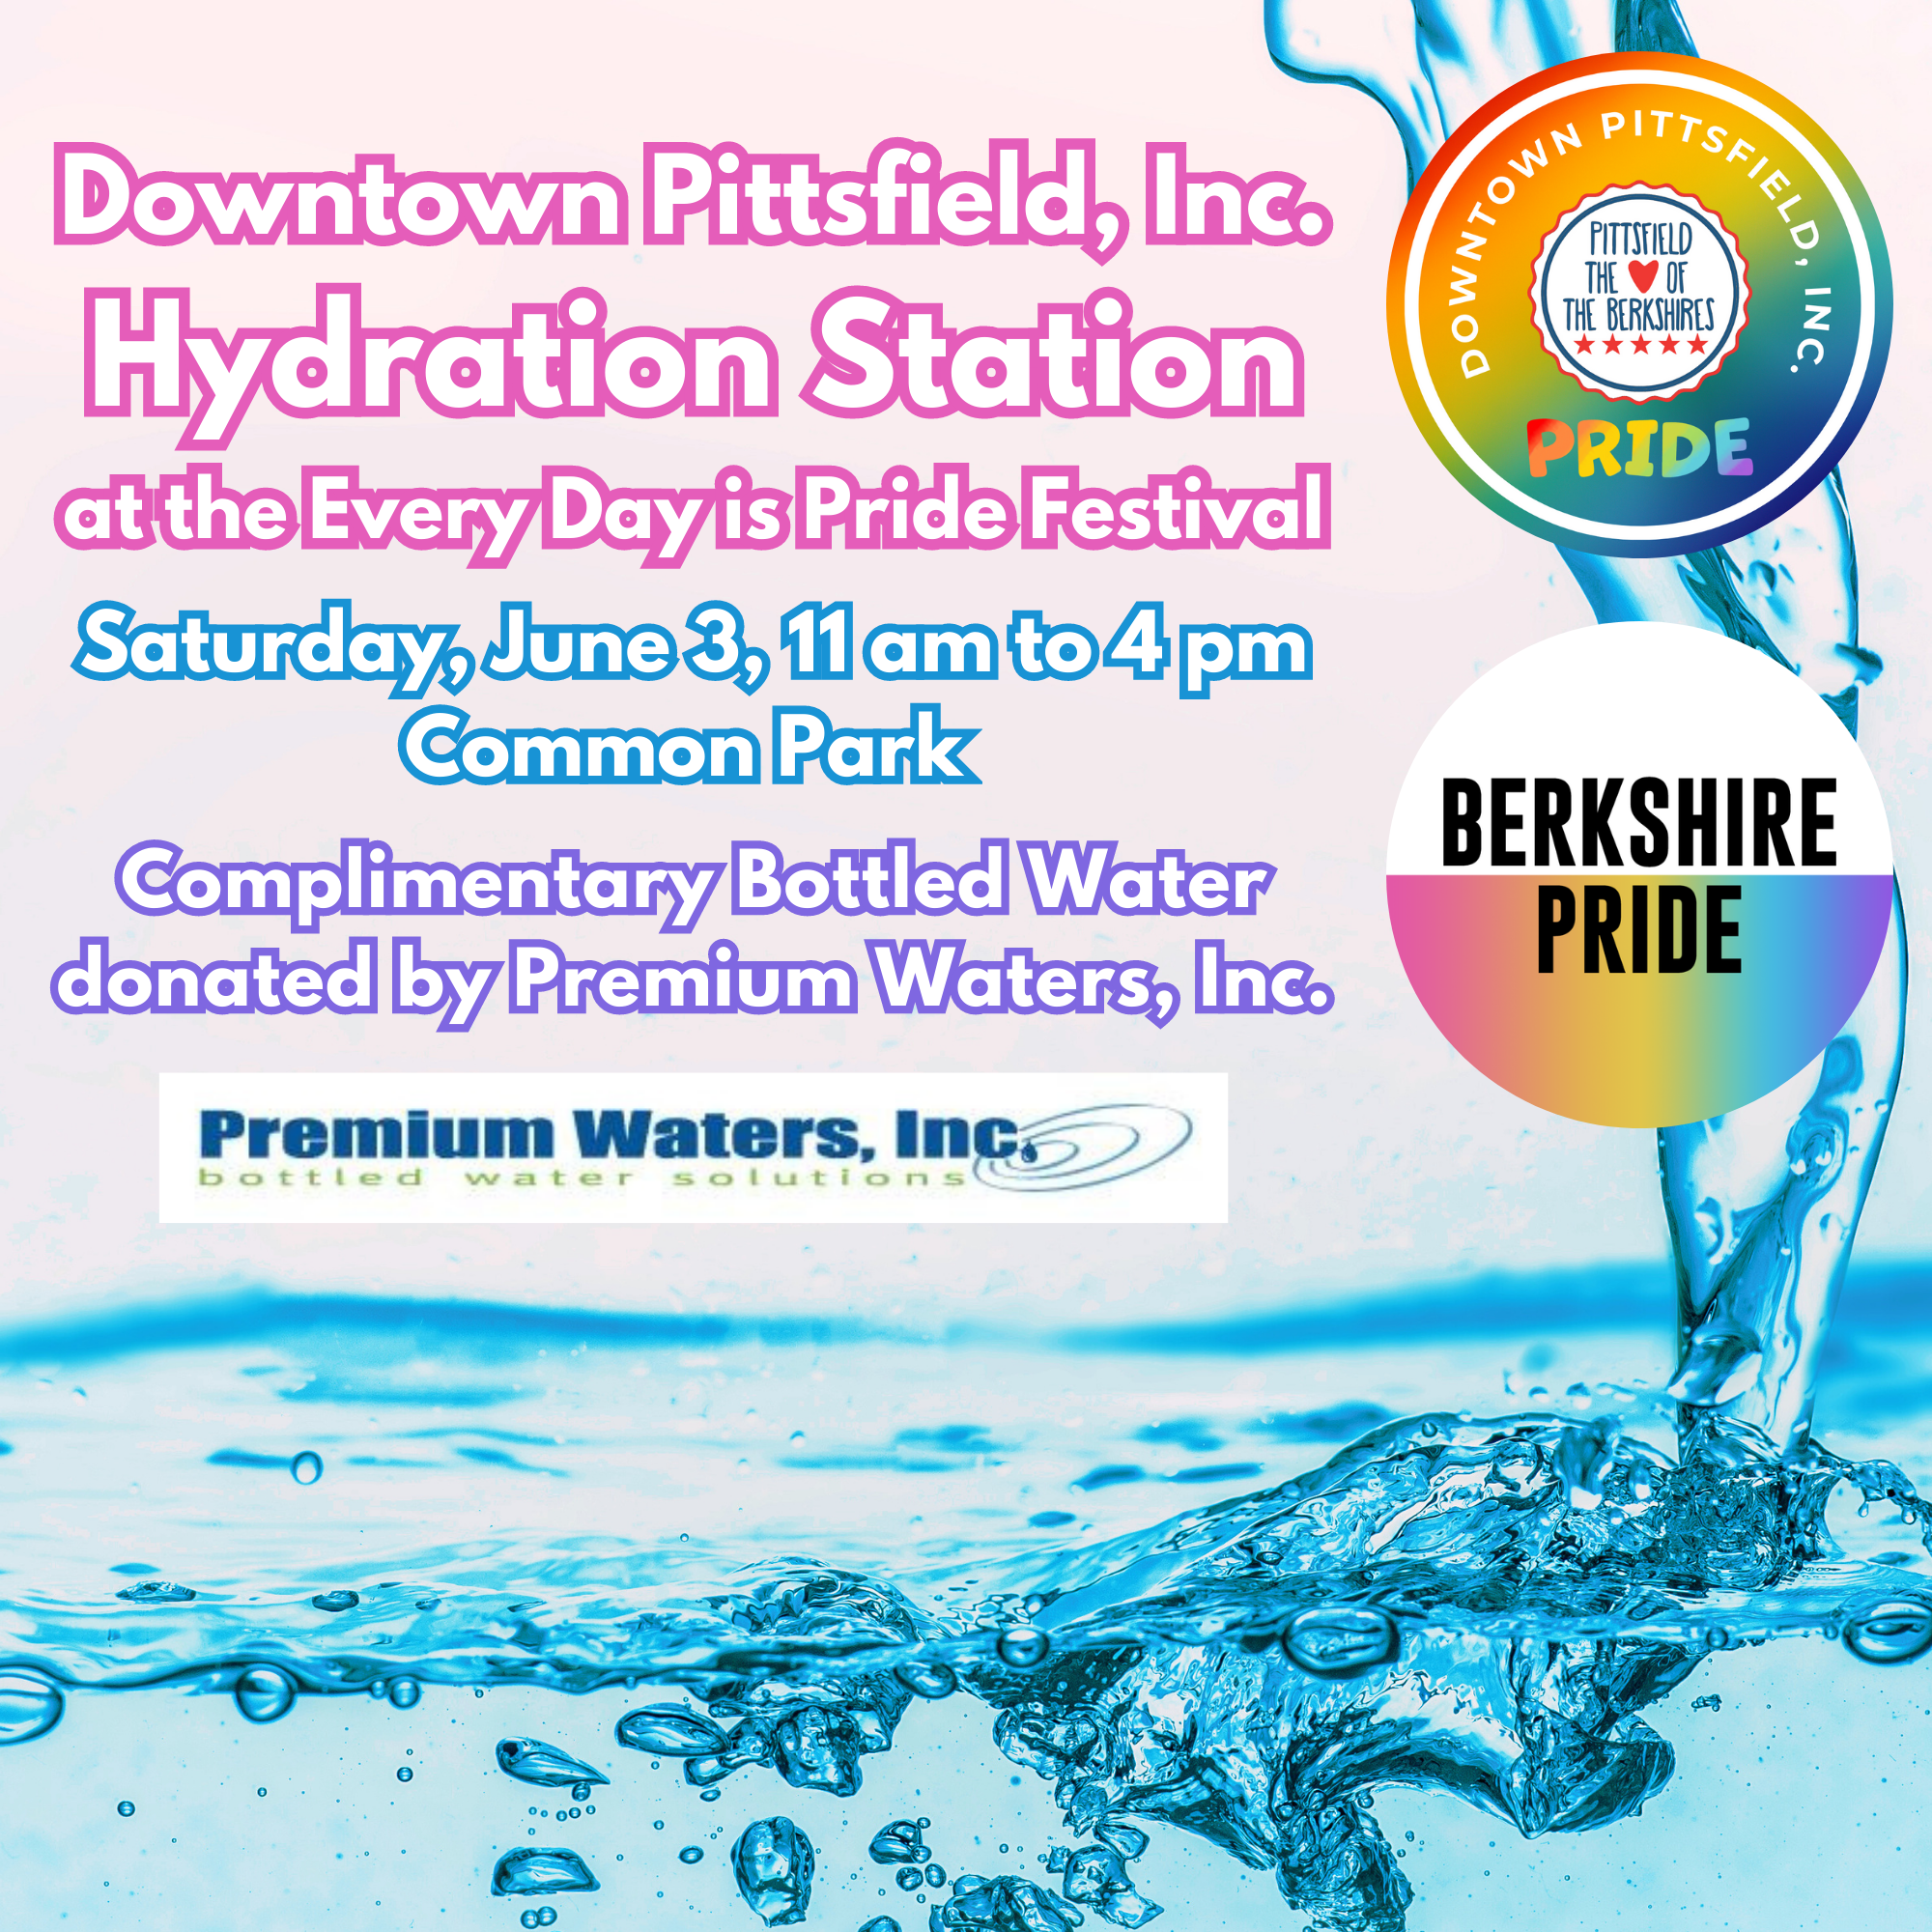 Downtown Pittsfield, Inc Hydration Station at the Every Day is Pride Festival